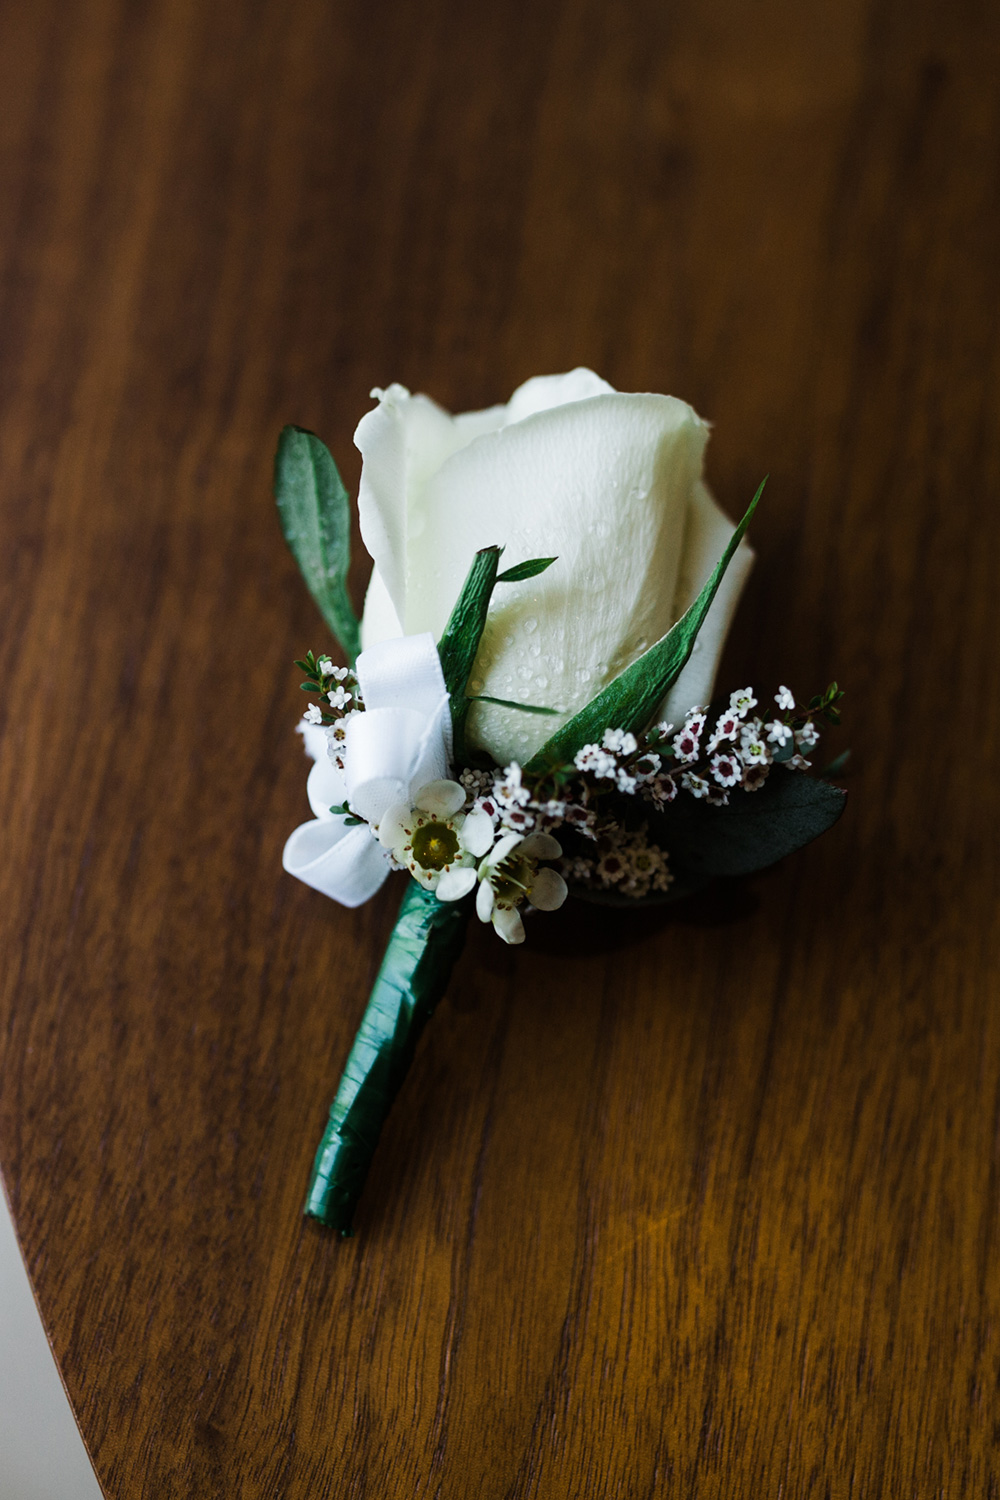 Sophie_Ambrose_Simple-Elegant-Wedding_This-is-Life-Photography_SBS_002